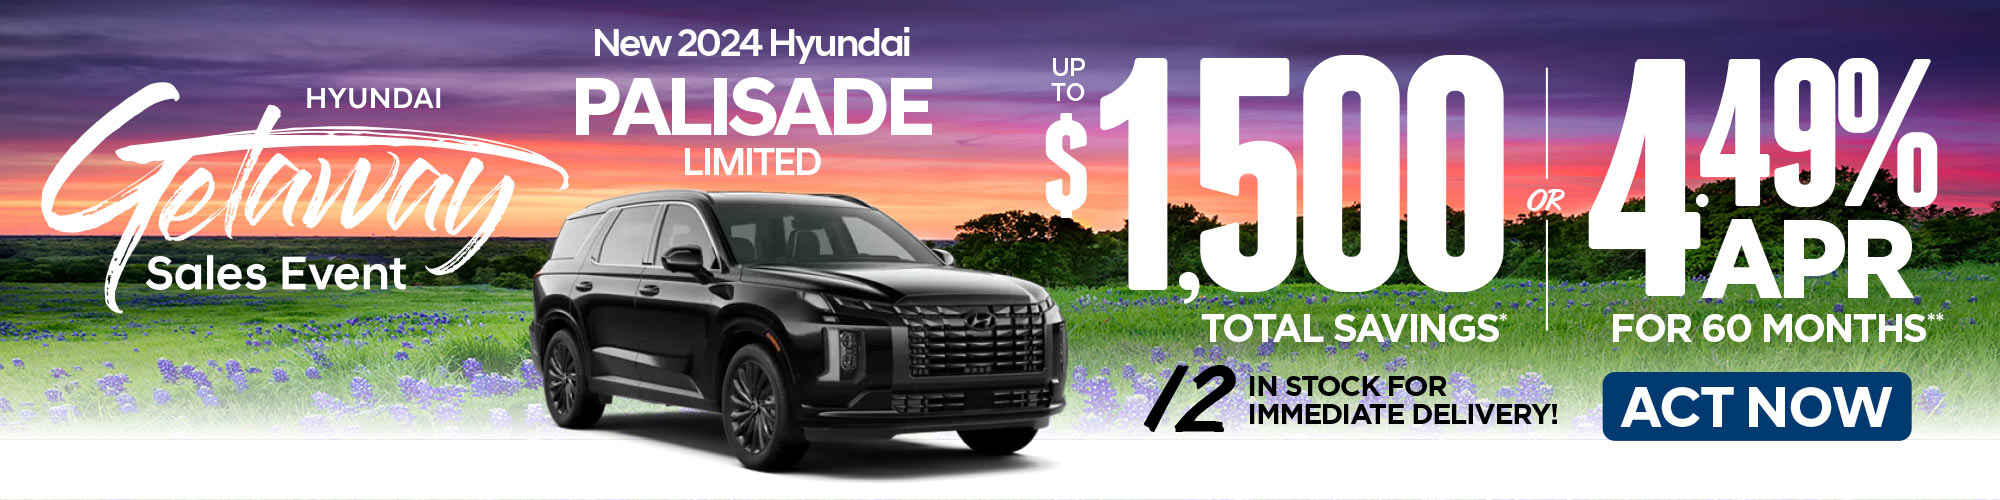 2.9% APR on select New 2023 Hyundai Models - ACT NOW